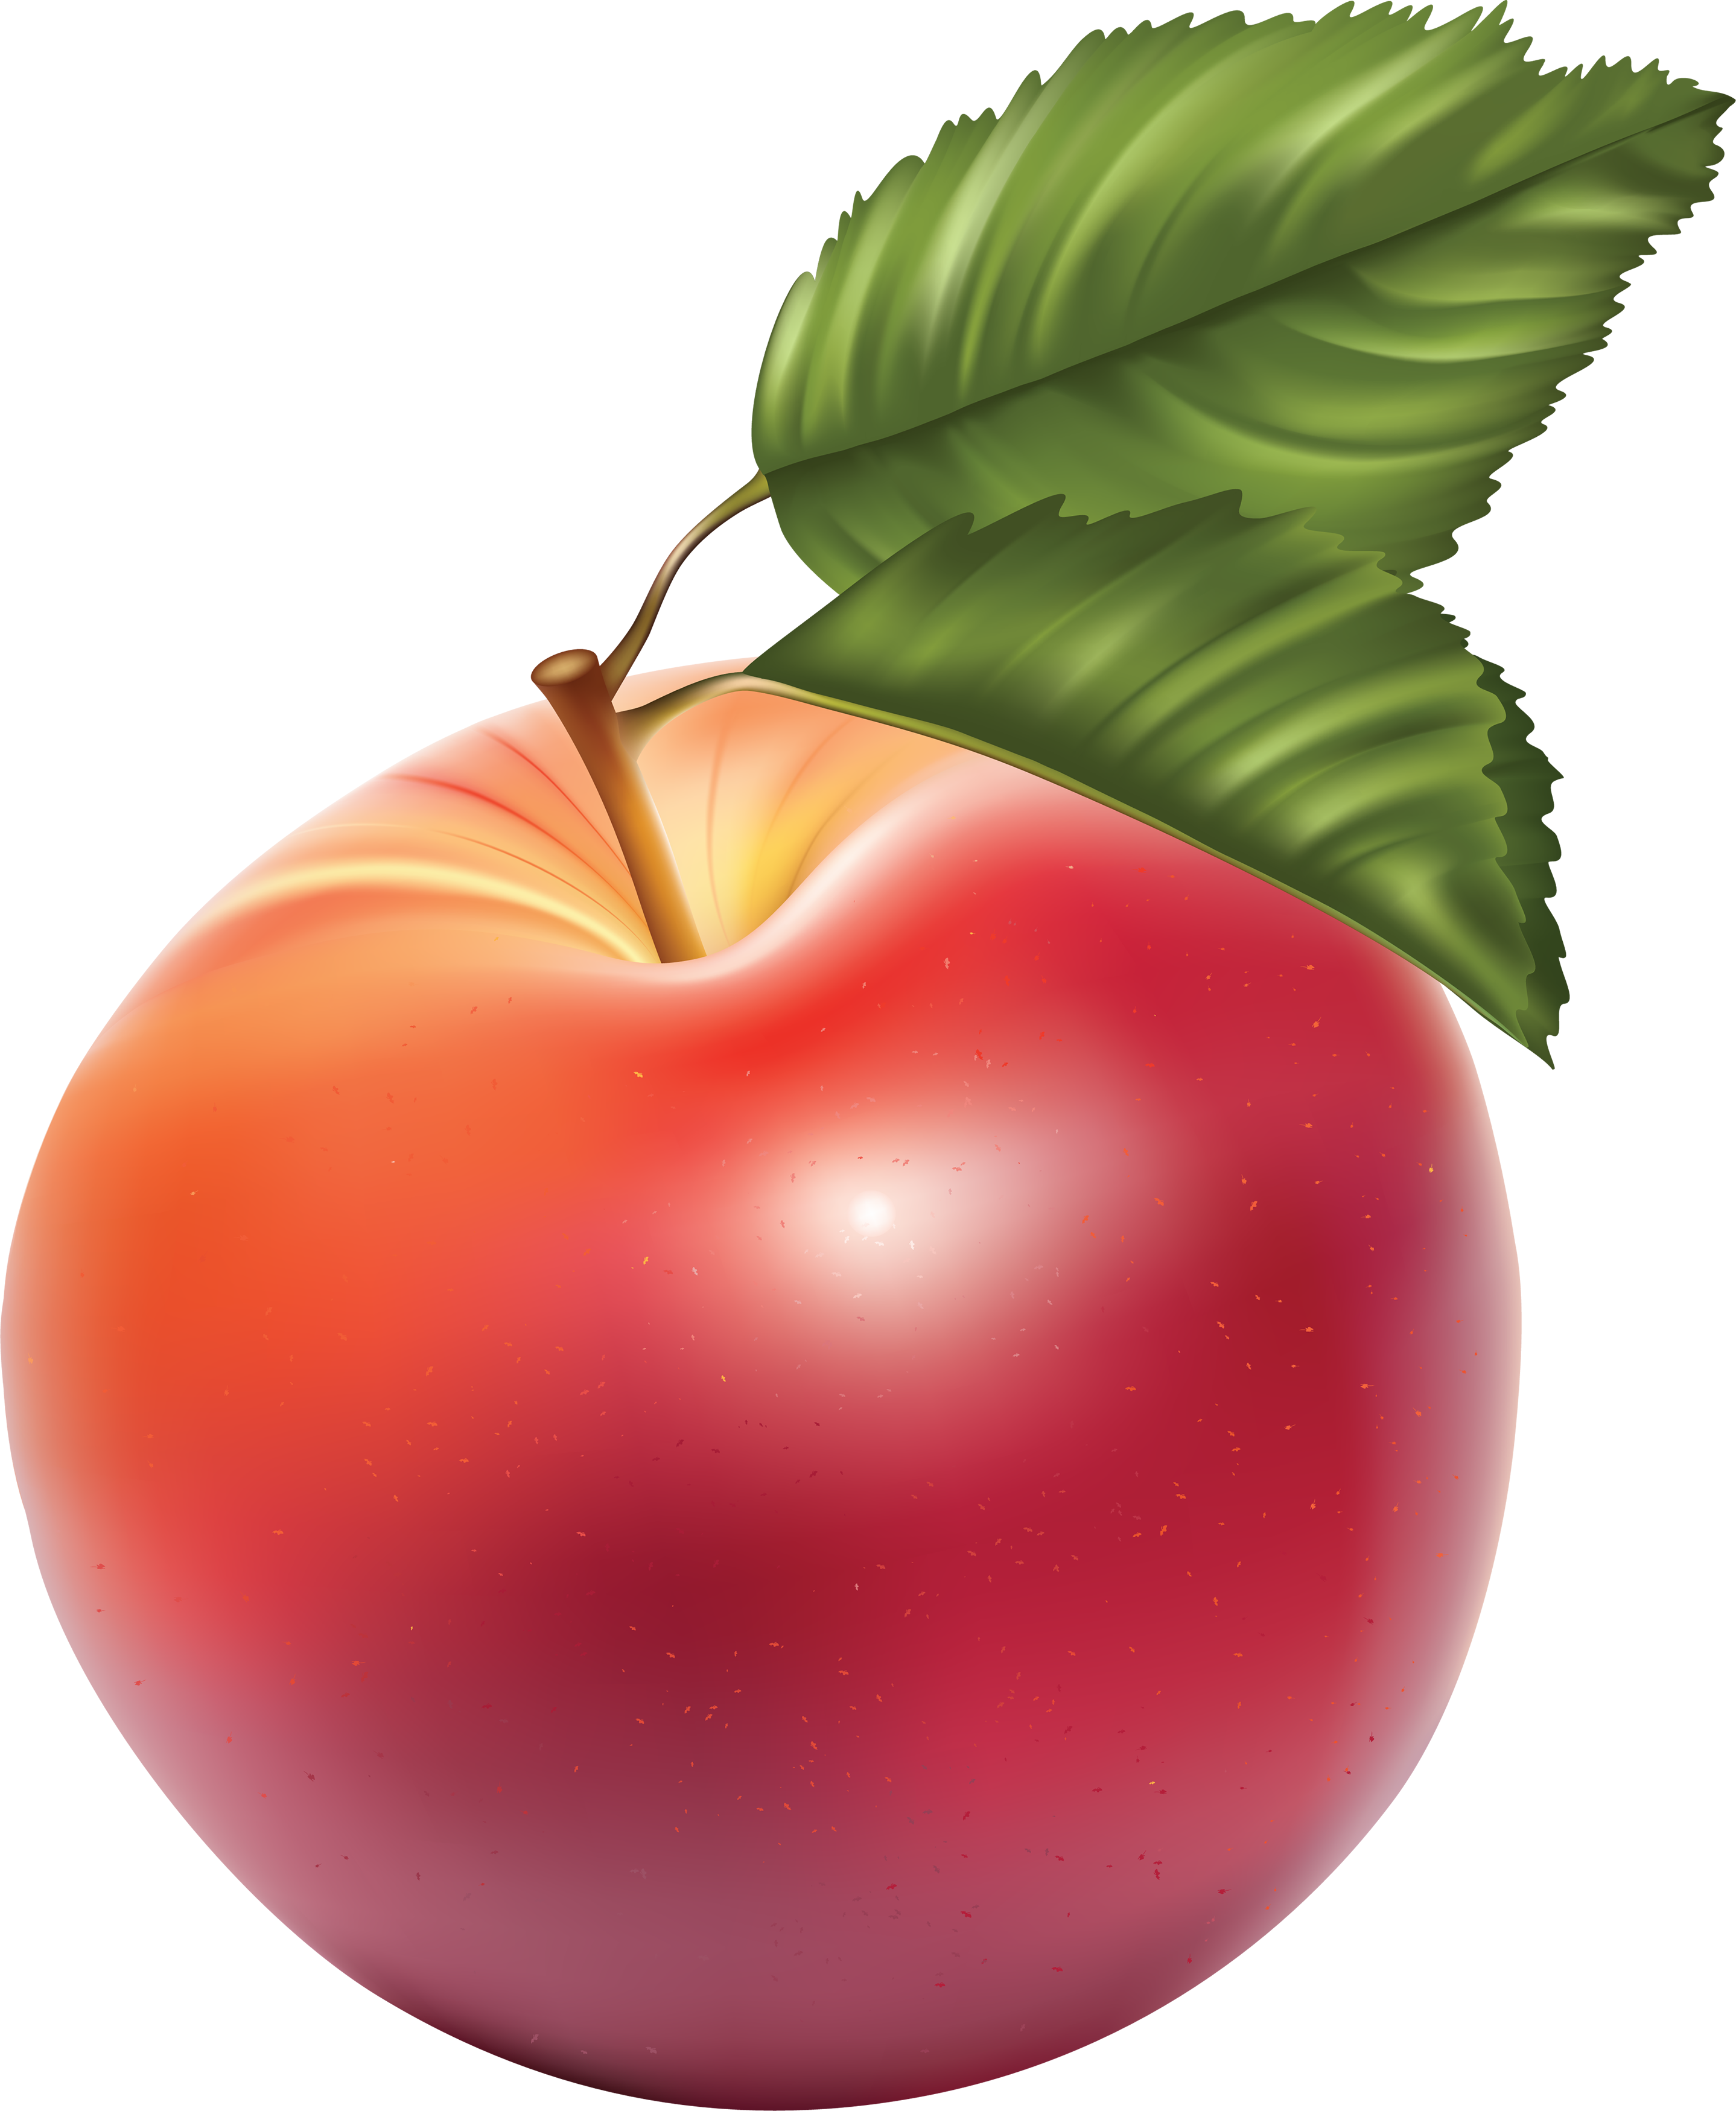 red apple rendered image PNG